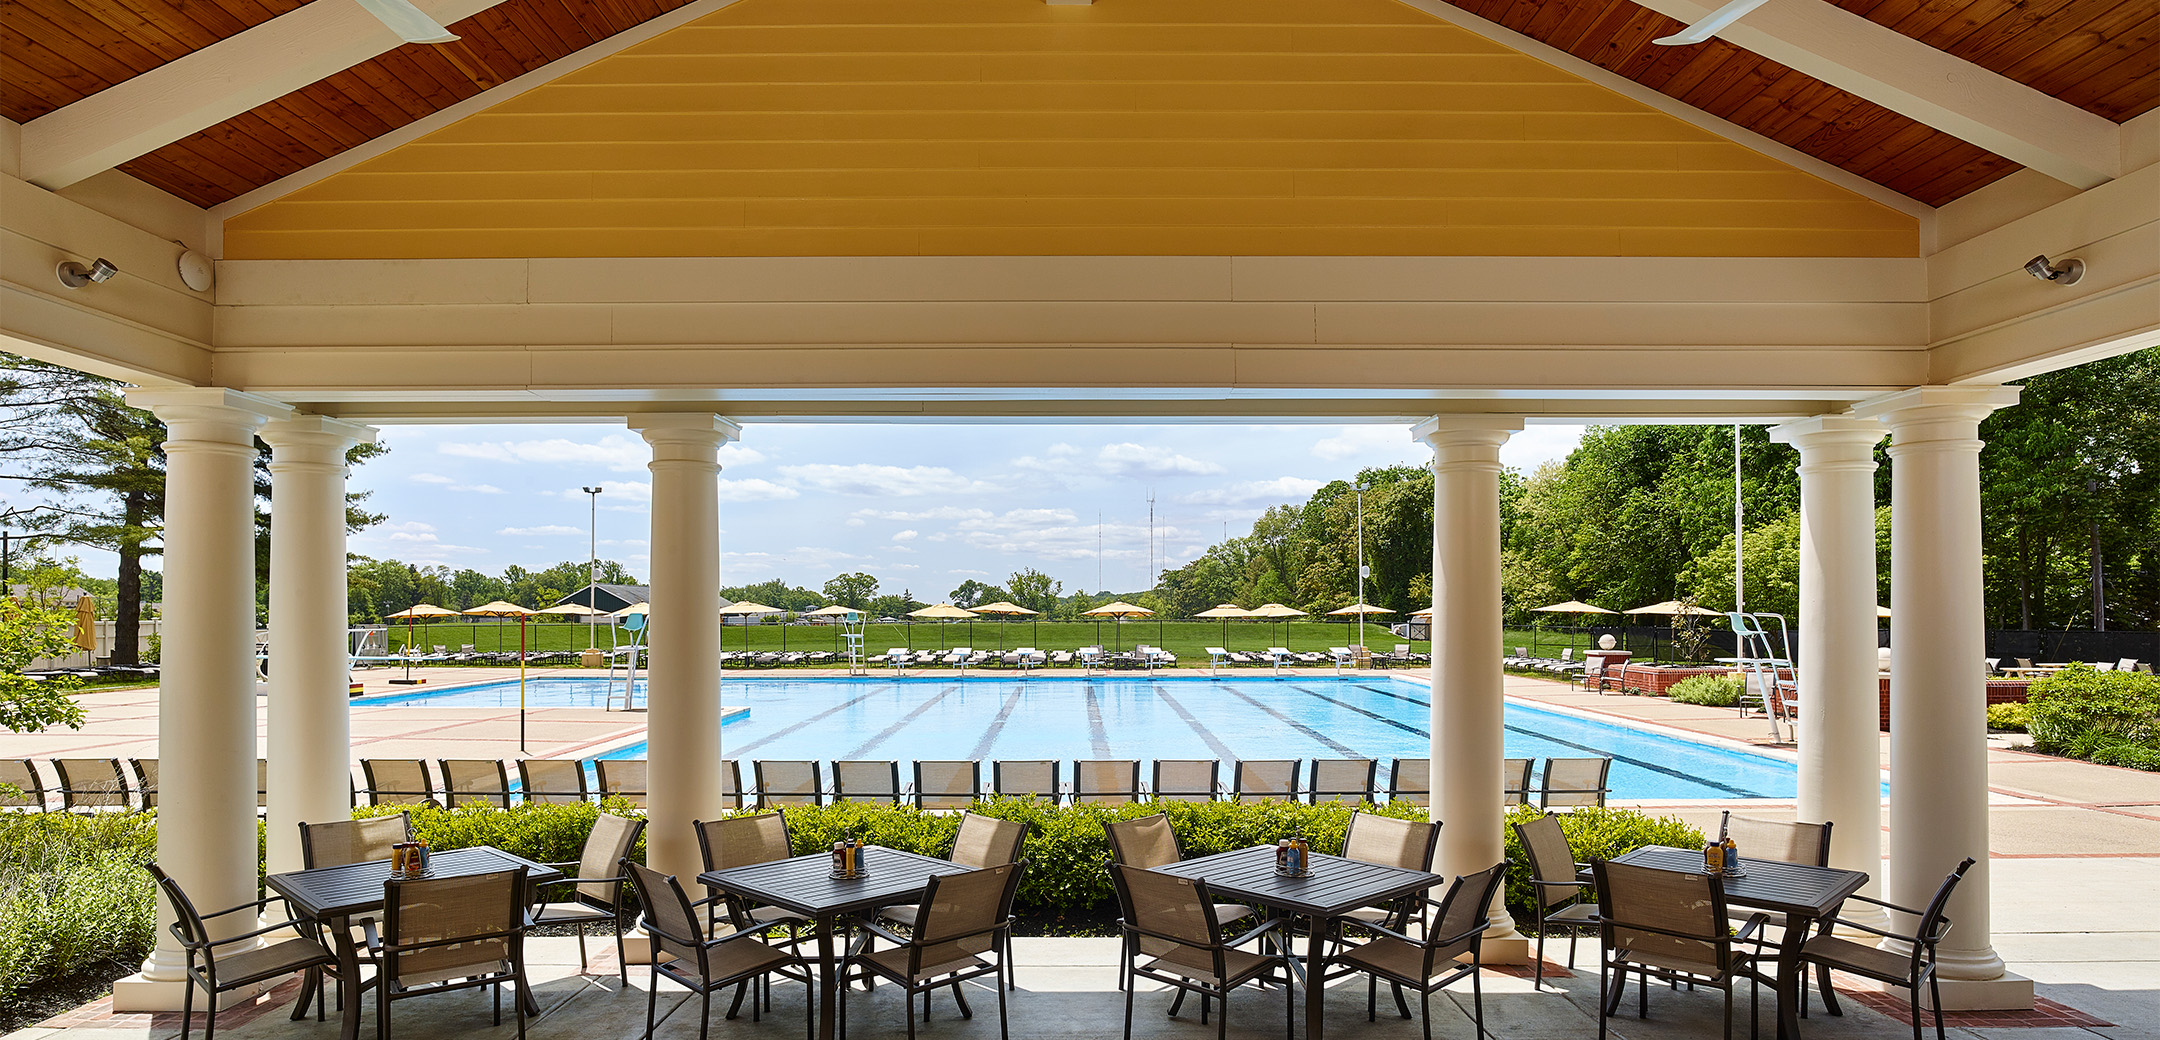 A close up view from the Philadelphia Cricket Club's Pool House / Pub with the large lap pool in the background.